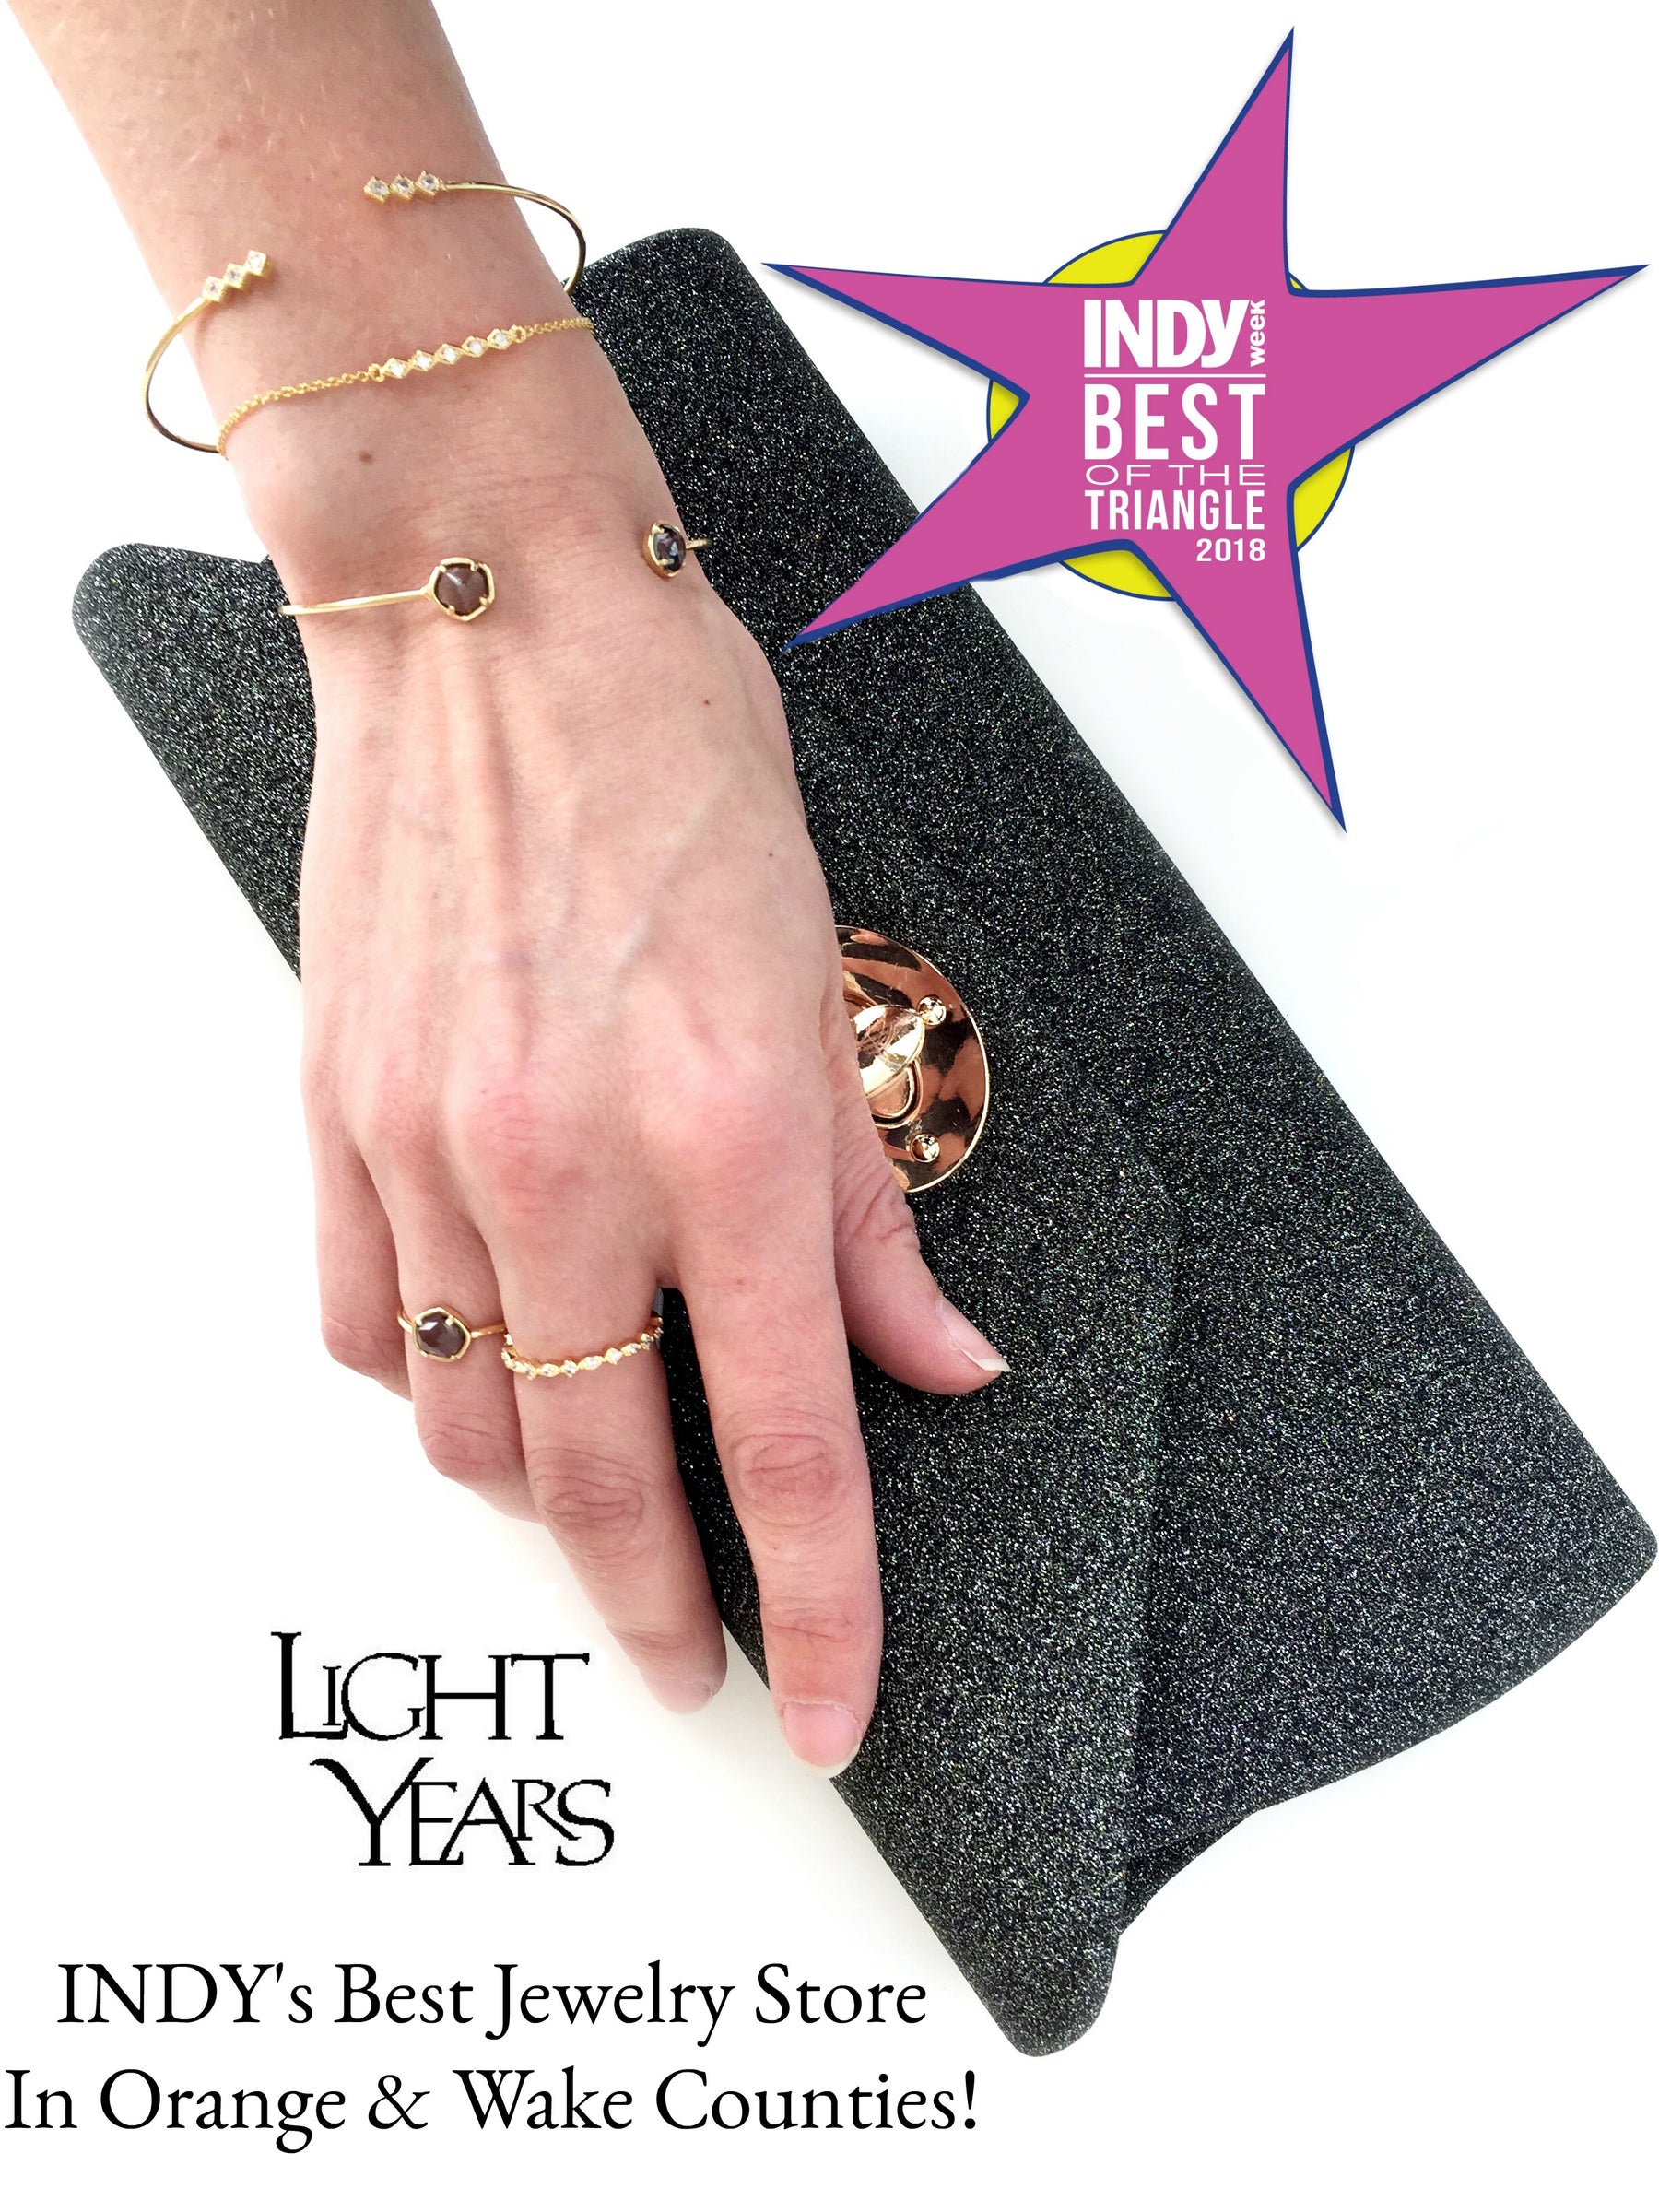 Image of a hand with jewelry holding a purse and a star that says Indy Best in the Triangle